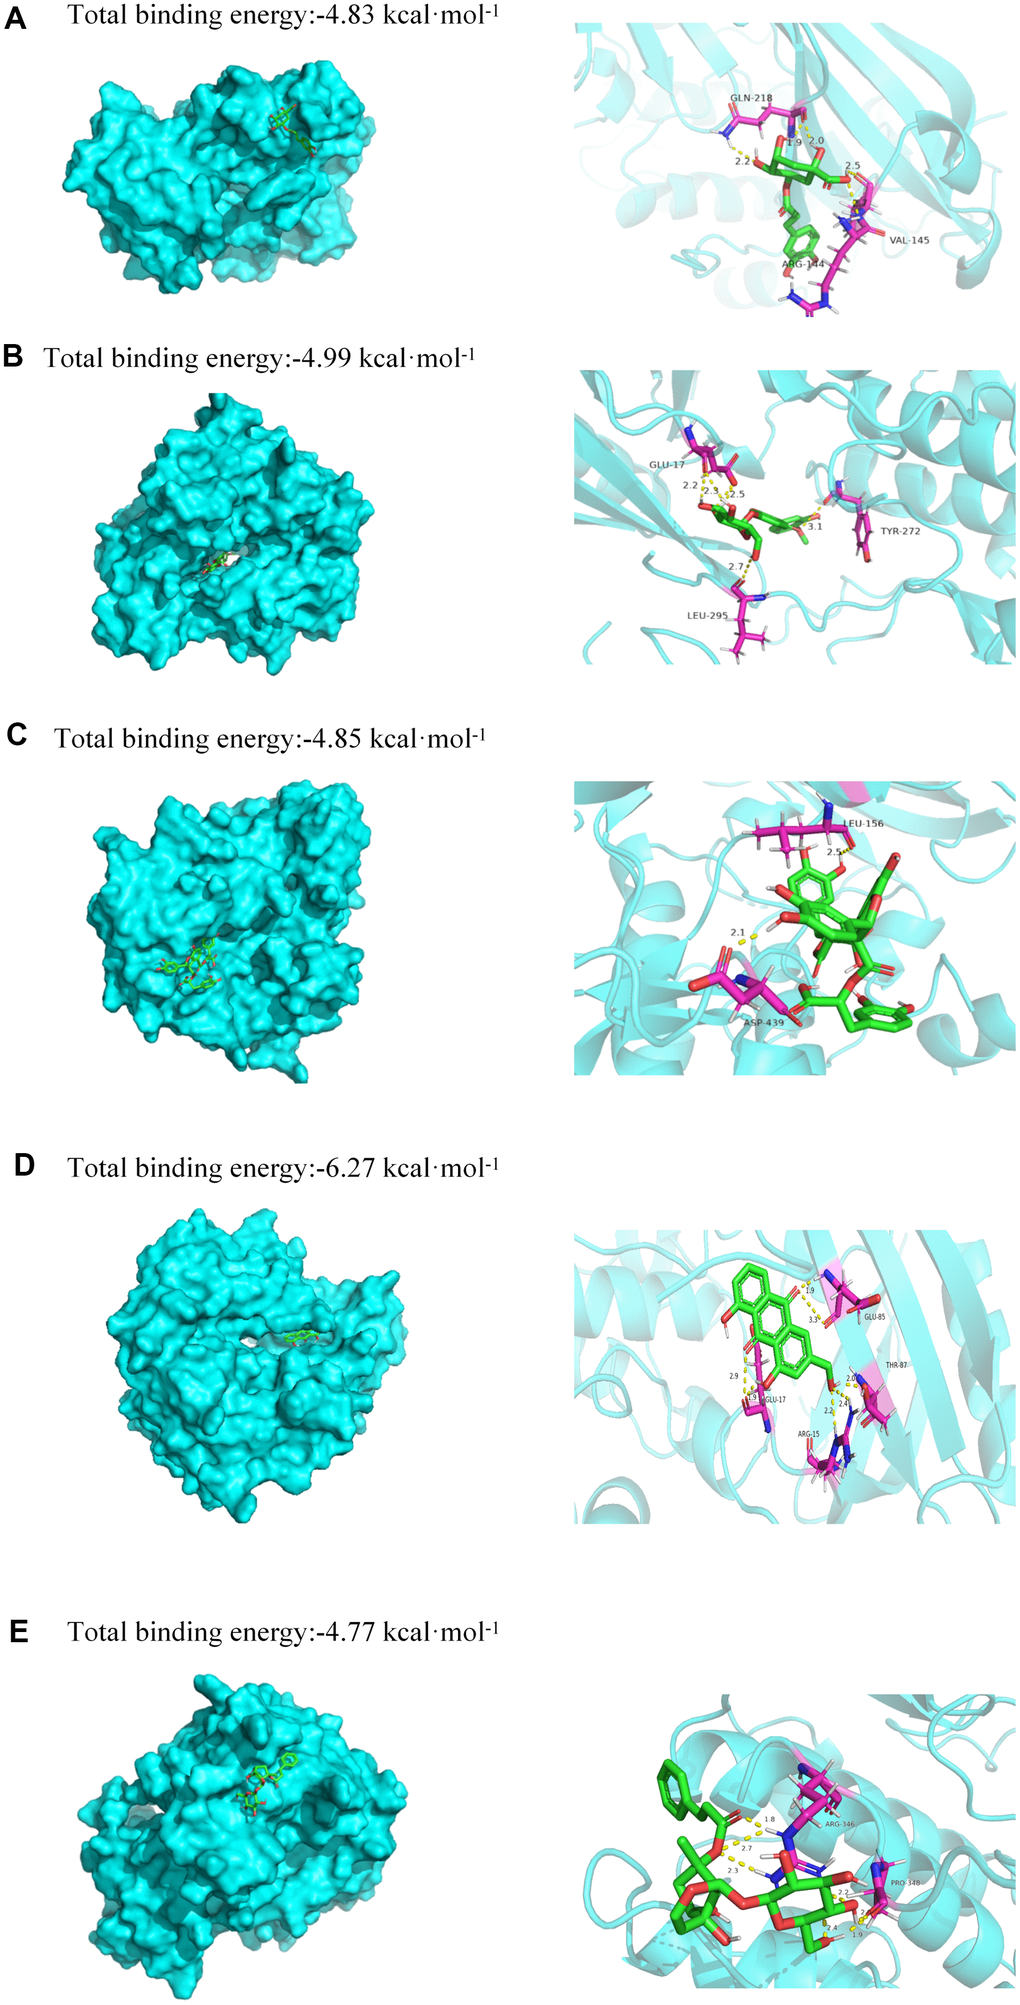 Molecular models of binding of selected compounds to target proteins. (A) Docking mode and interactions between chlorogenic acid and Akt, (B) calycosin-7-glucoside and Akt, (C) salvianolic acid B and Akt, (D) aloe-emodin and Akt, (E) haragoside and Akt.